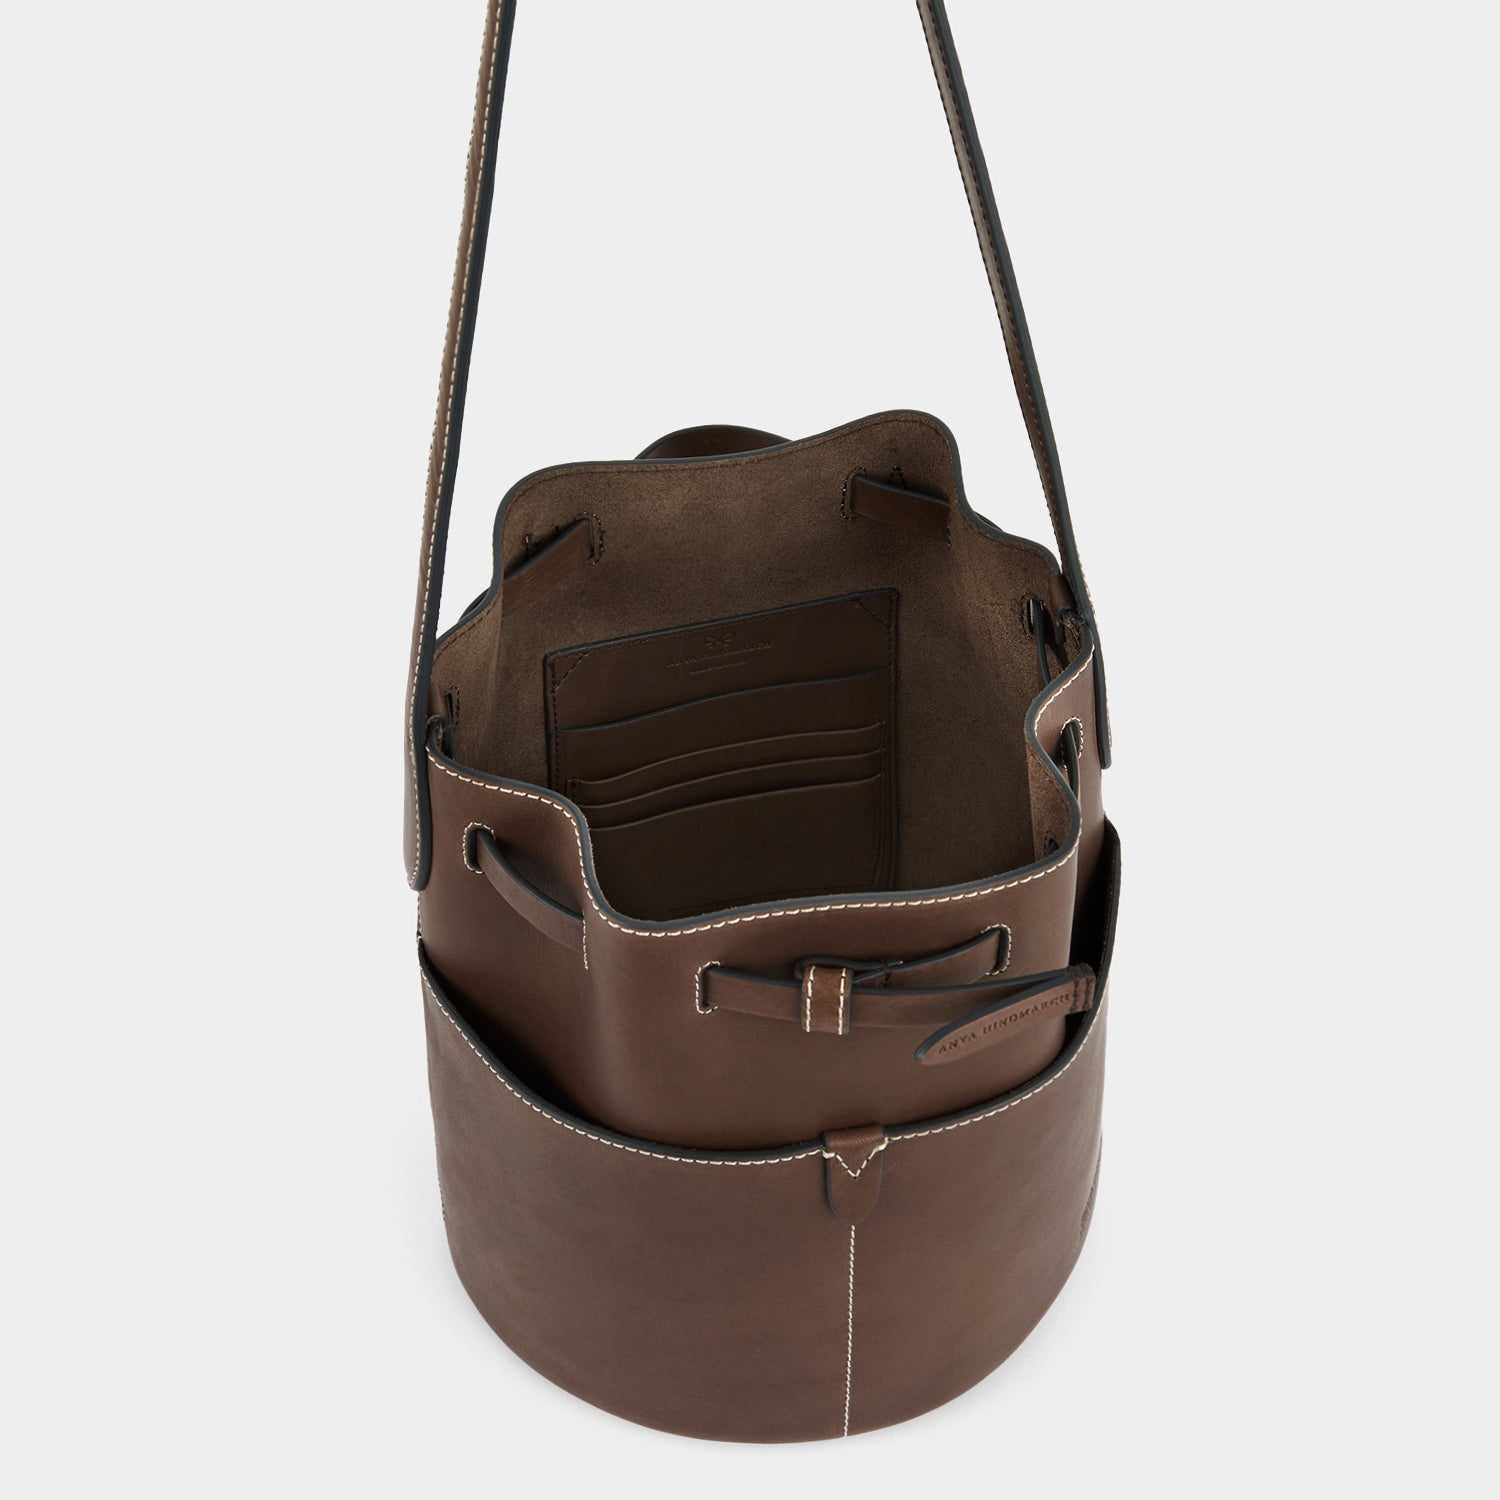 Return to Nature Small Bucket Bag -

                  
                    Compostable Leather in Truffle -
                  

                  Anya Hindmarch UK
